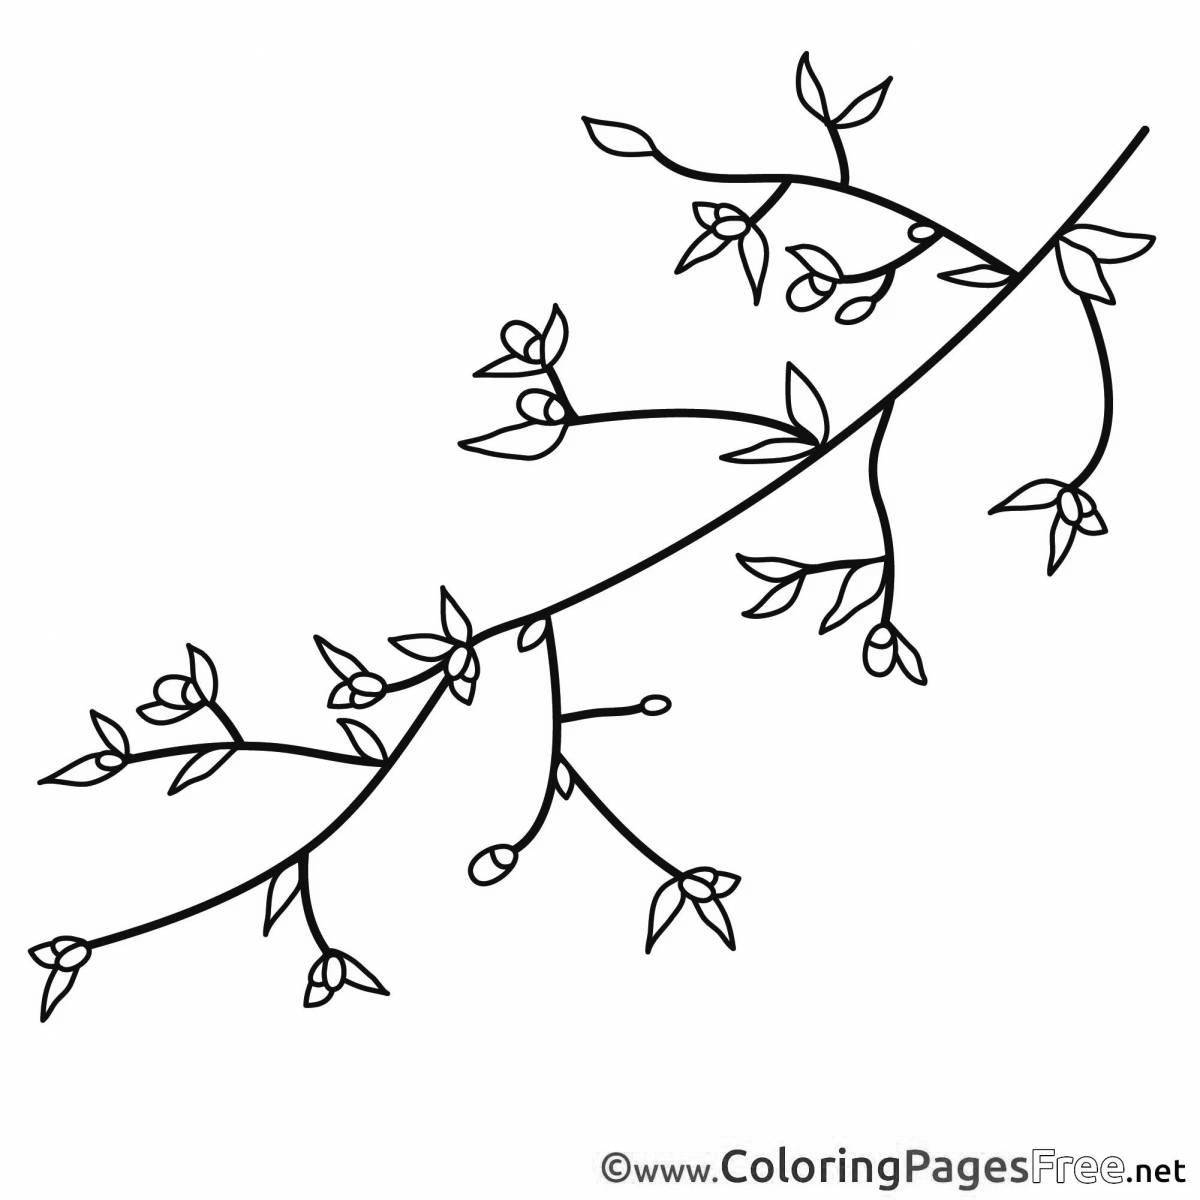 Colorful branch coloring book for kids